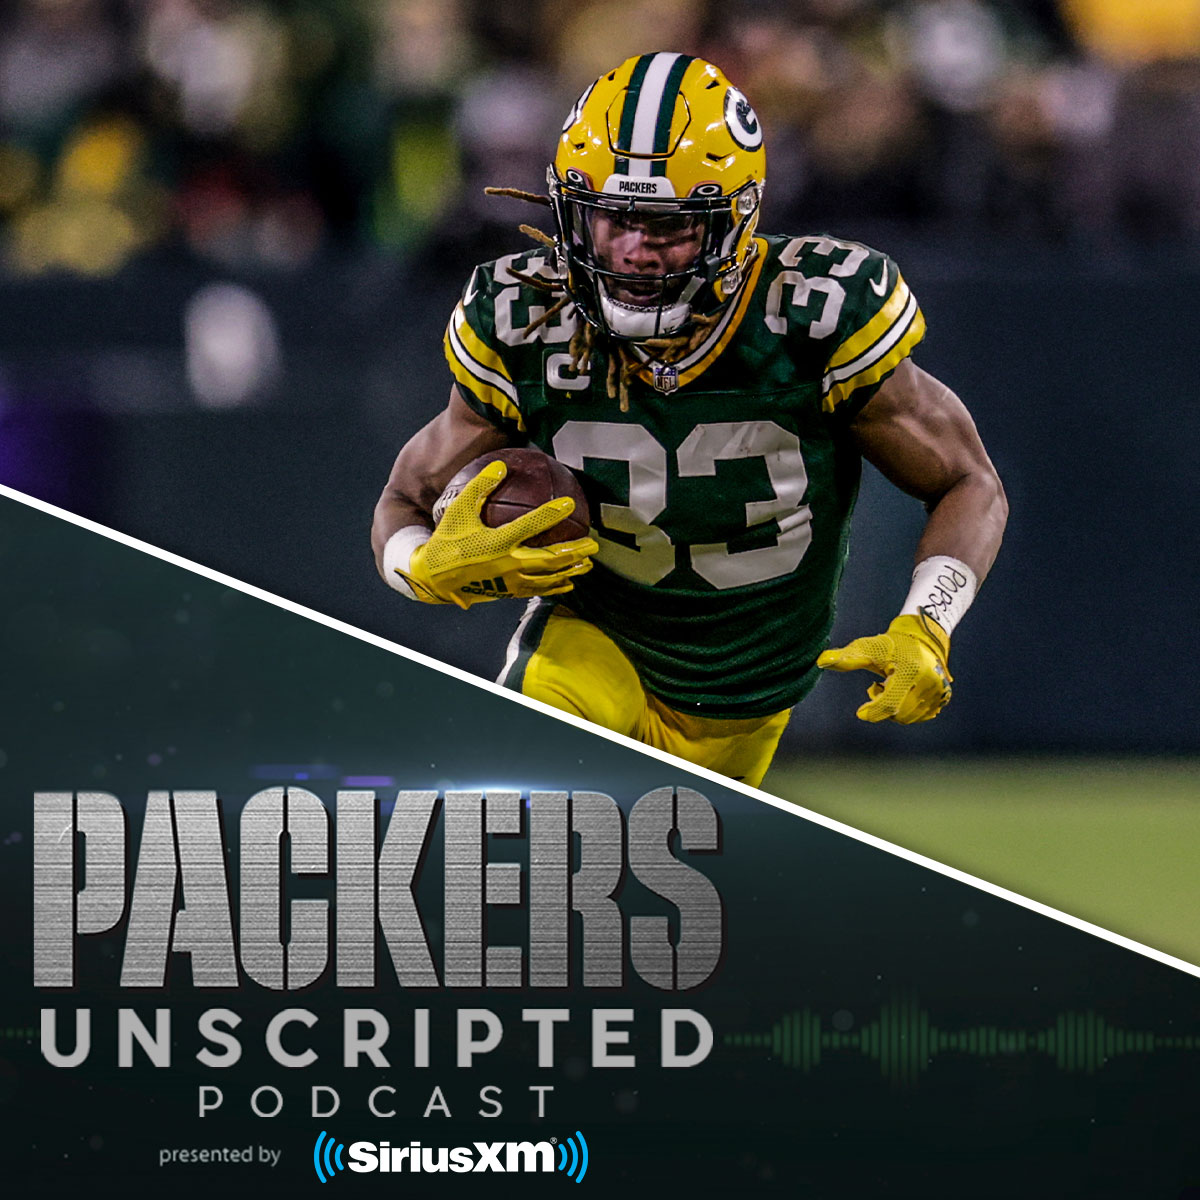 #699 Packers Unscripted: That’s a wrap